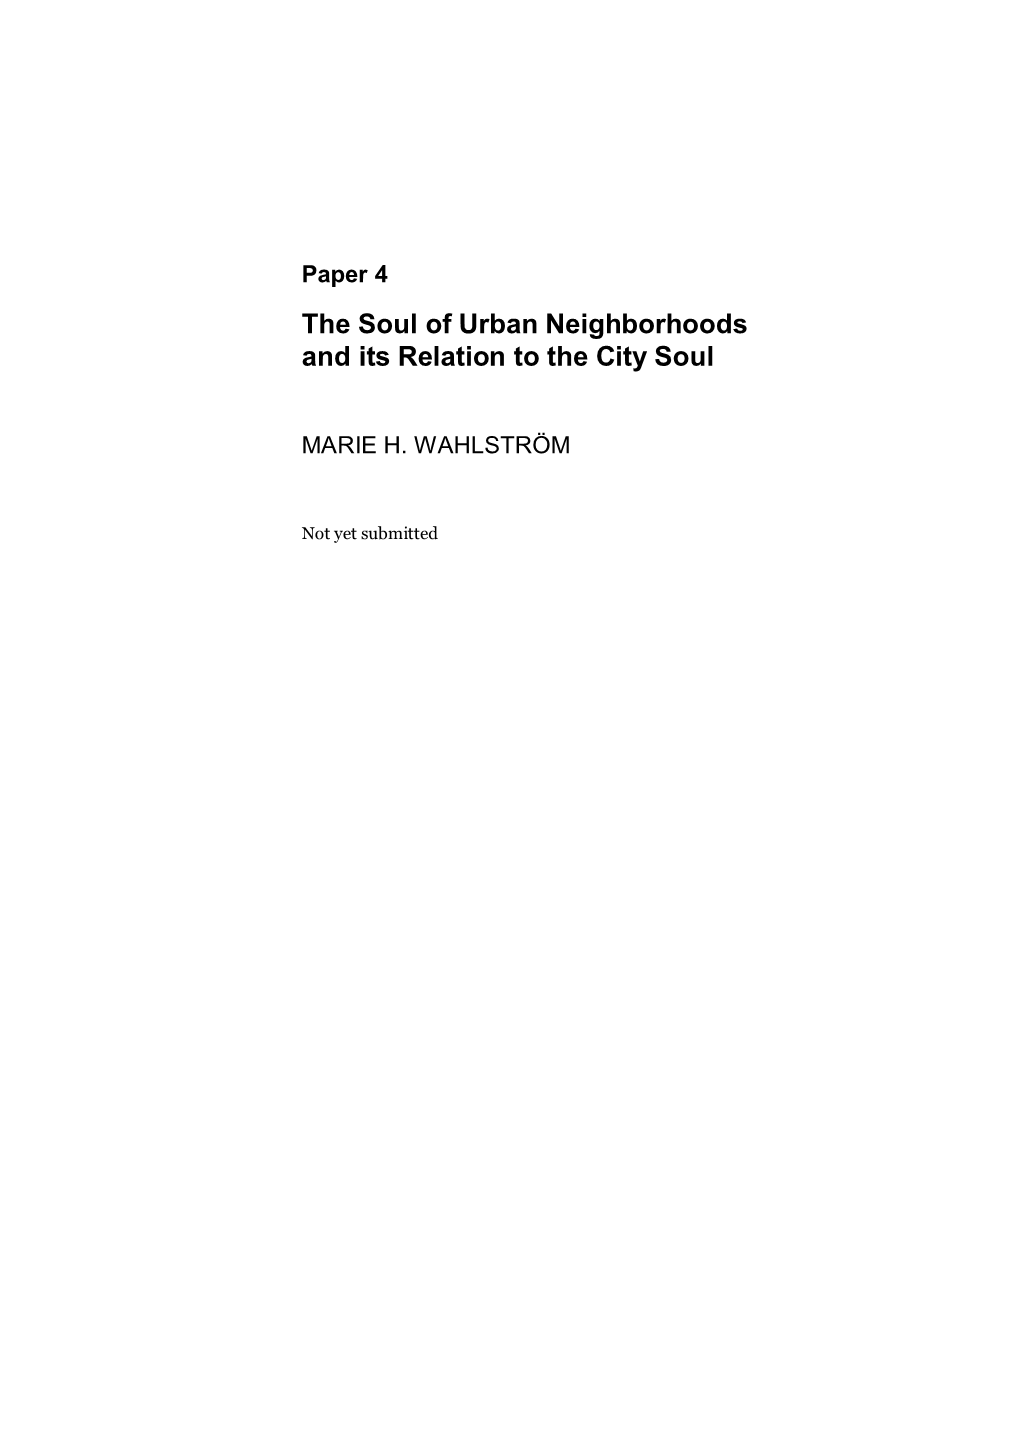 The Soul of Urban Neighborhoods and Its Relation to the City Soul